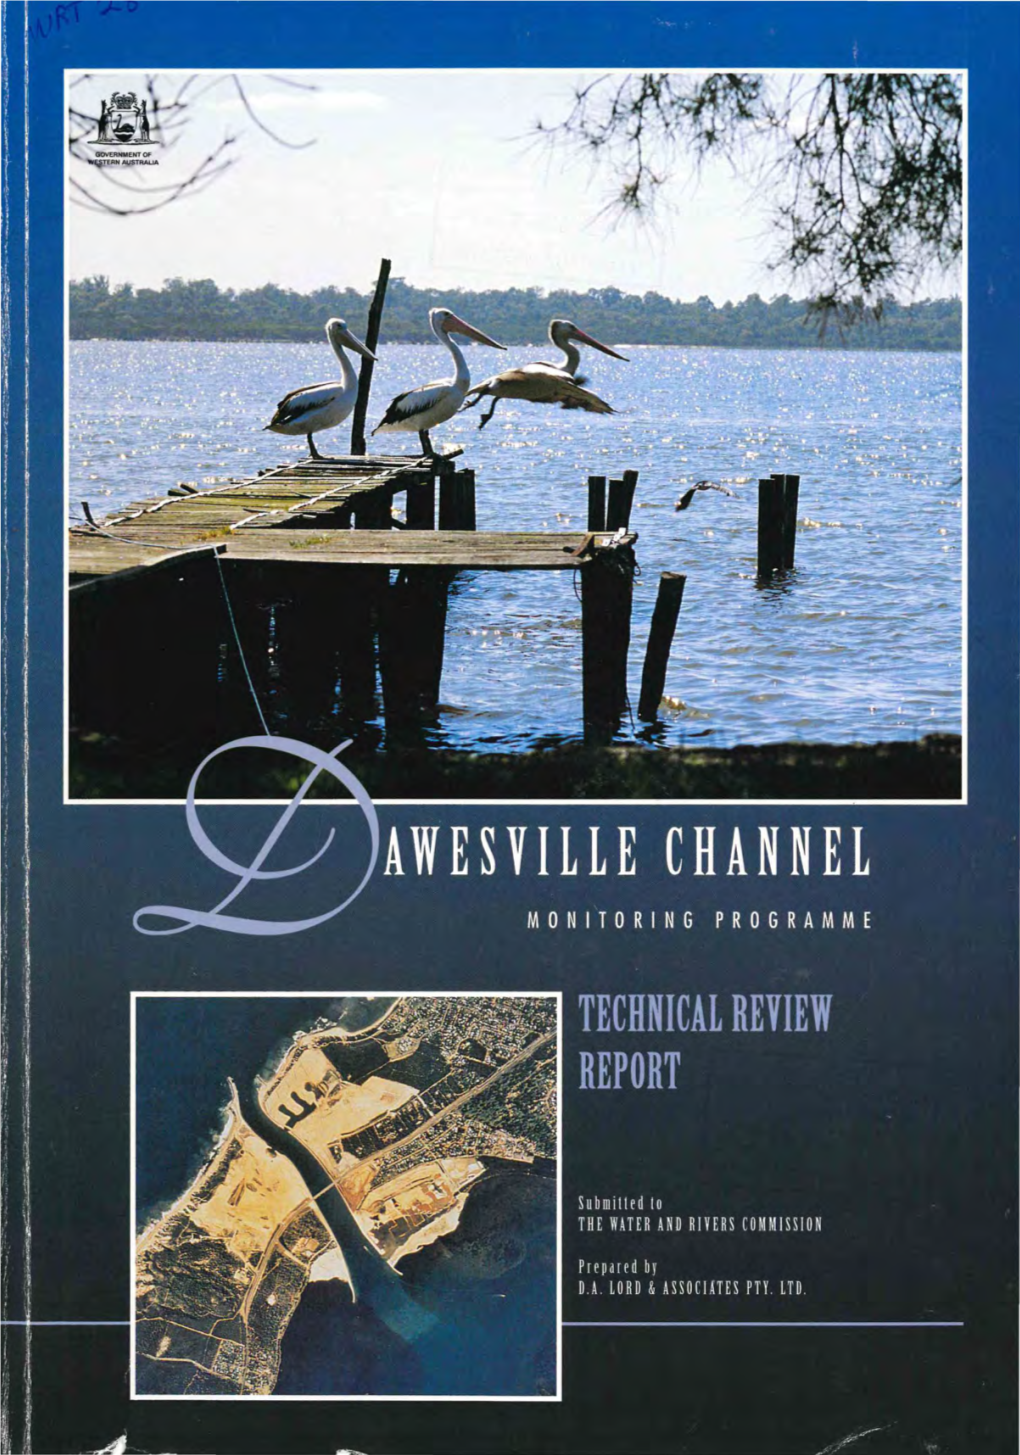 Awesville Channel